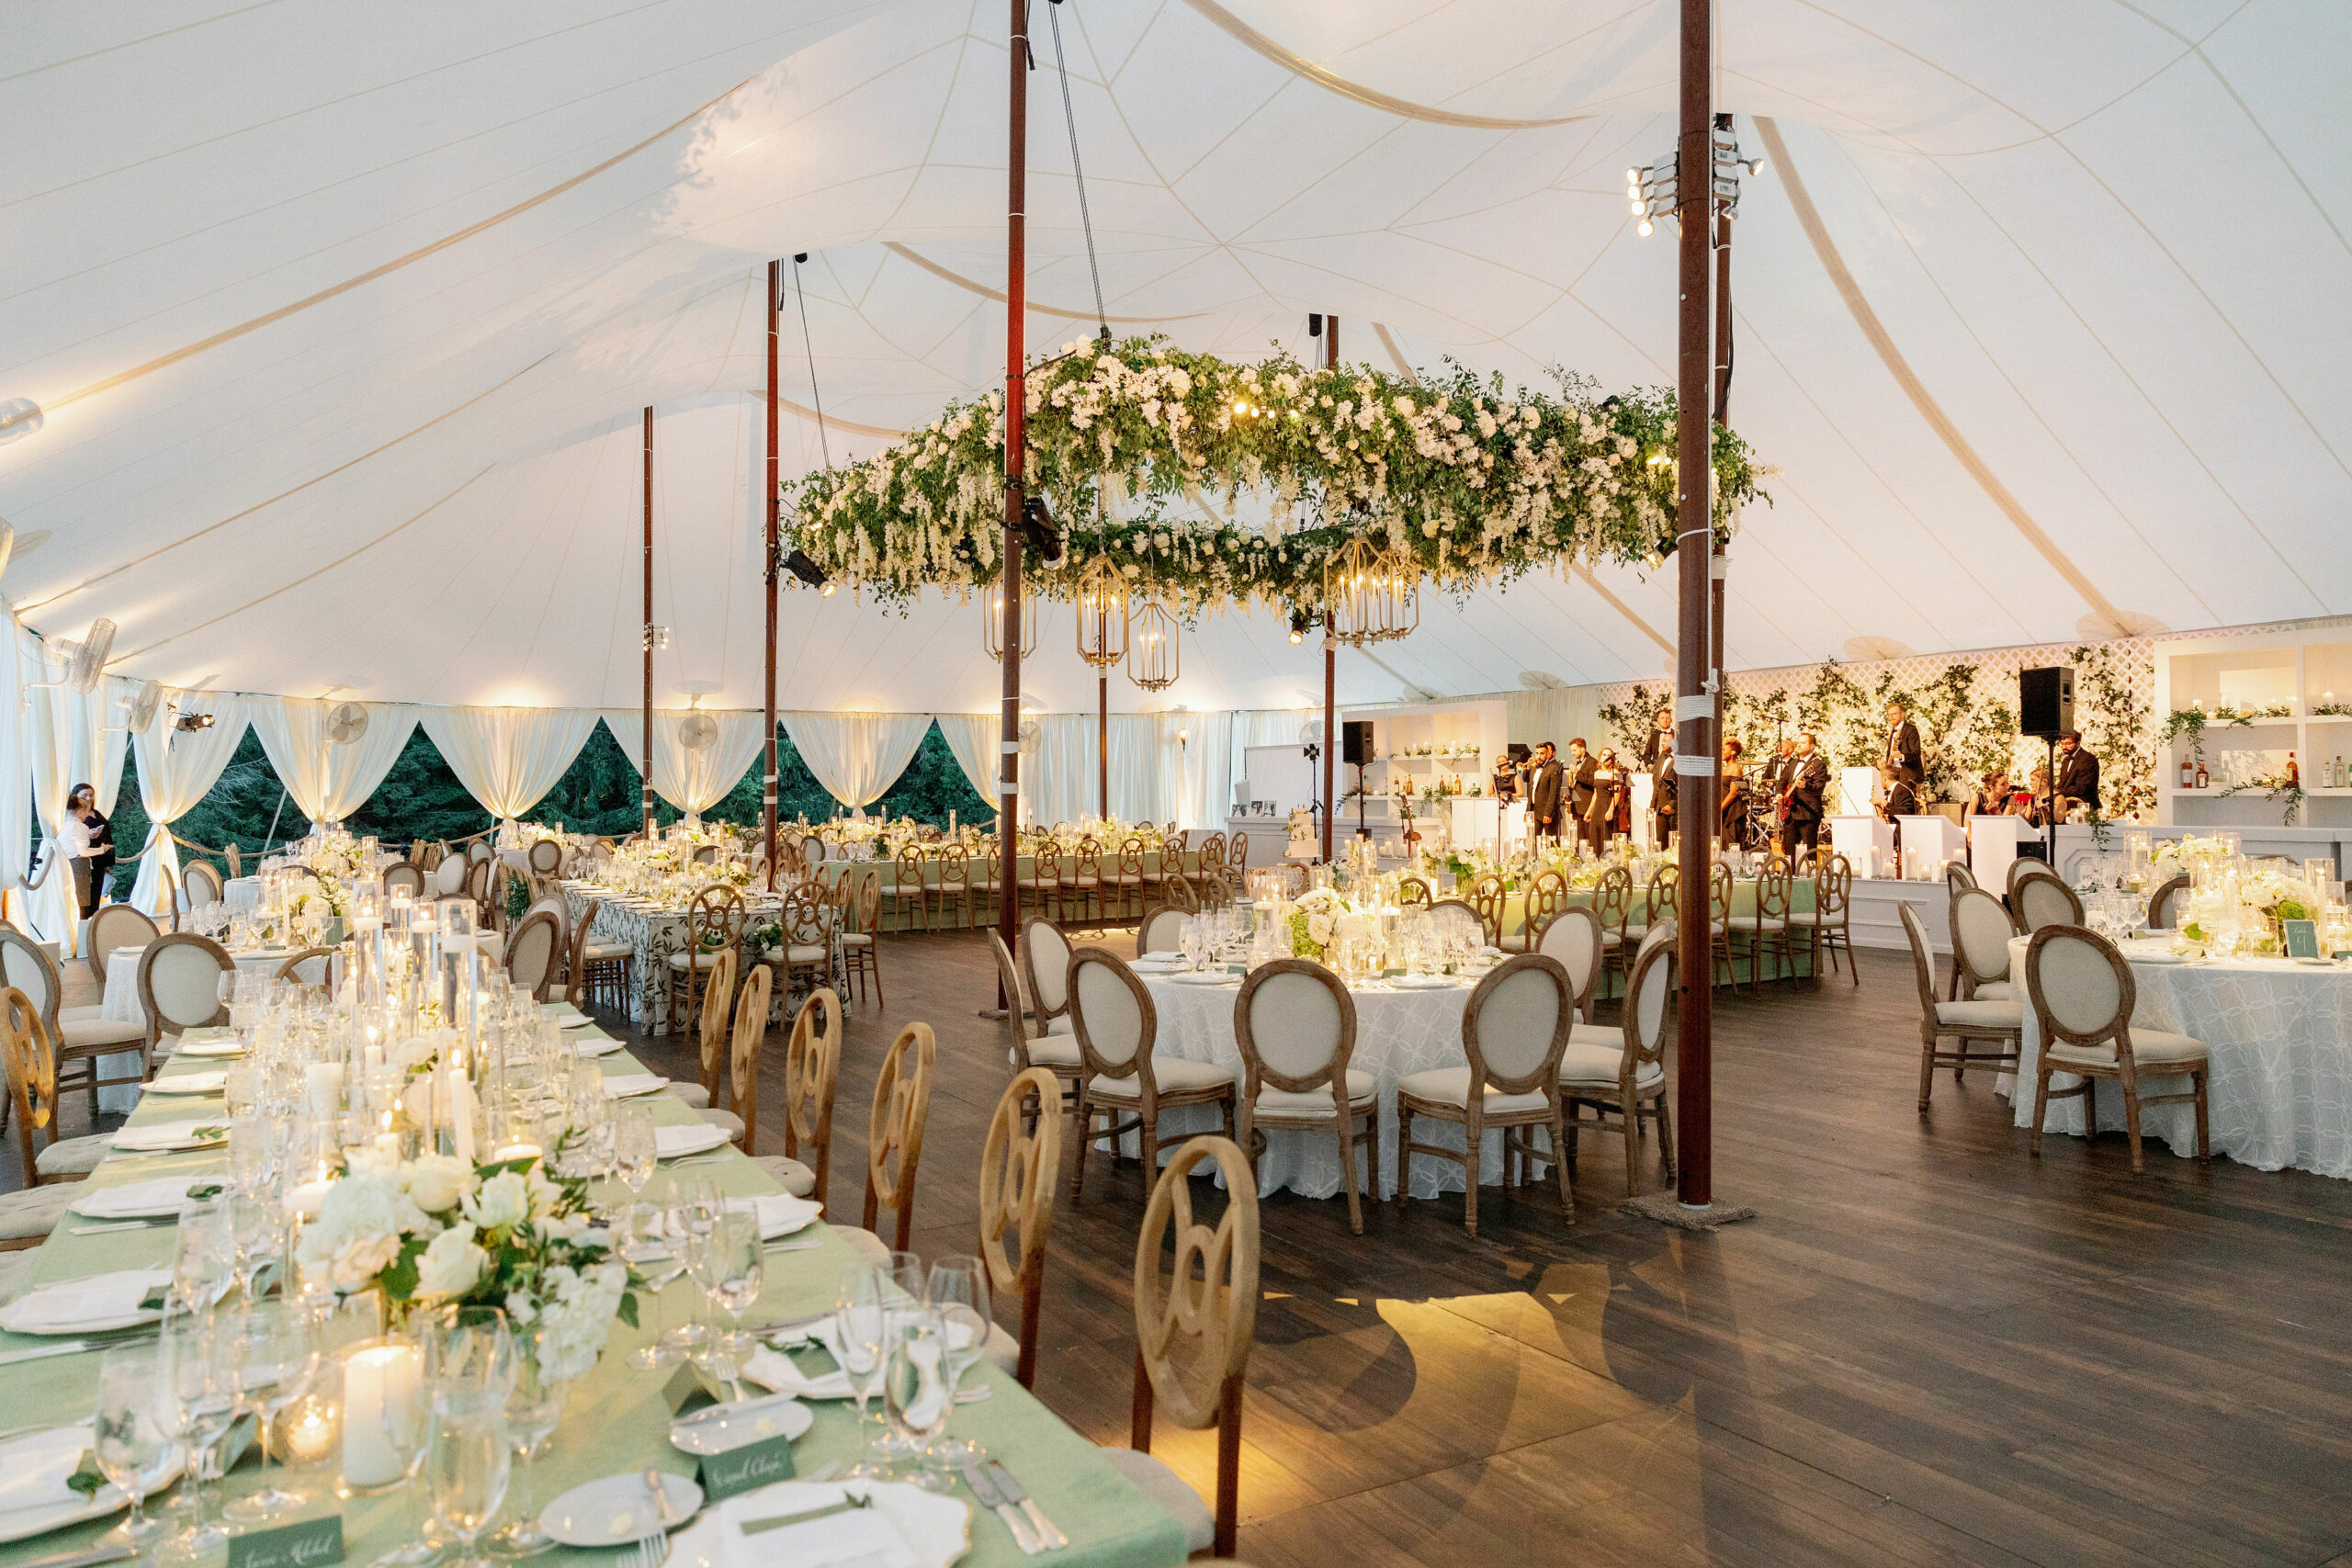 Country club sailcloth tent wedding